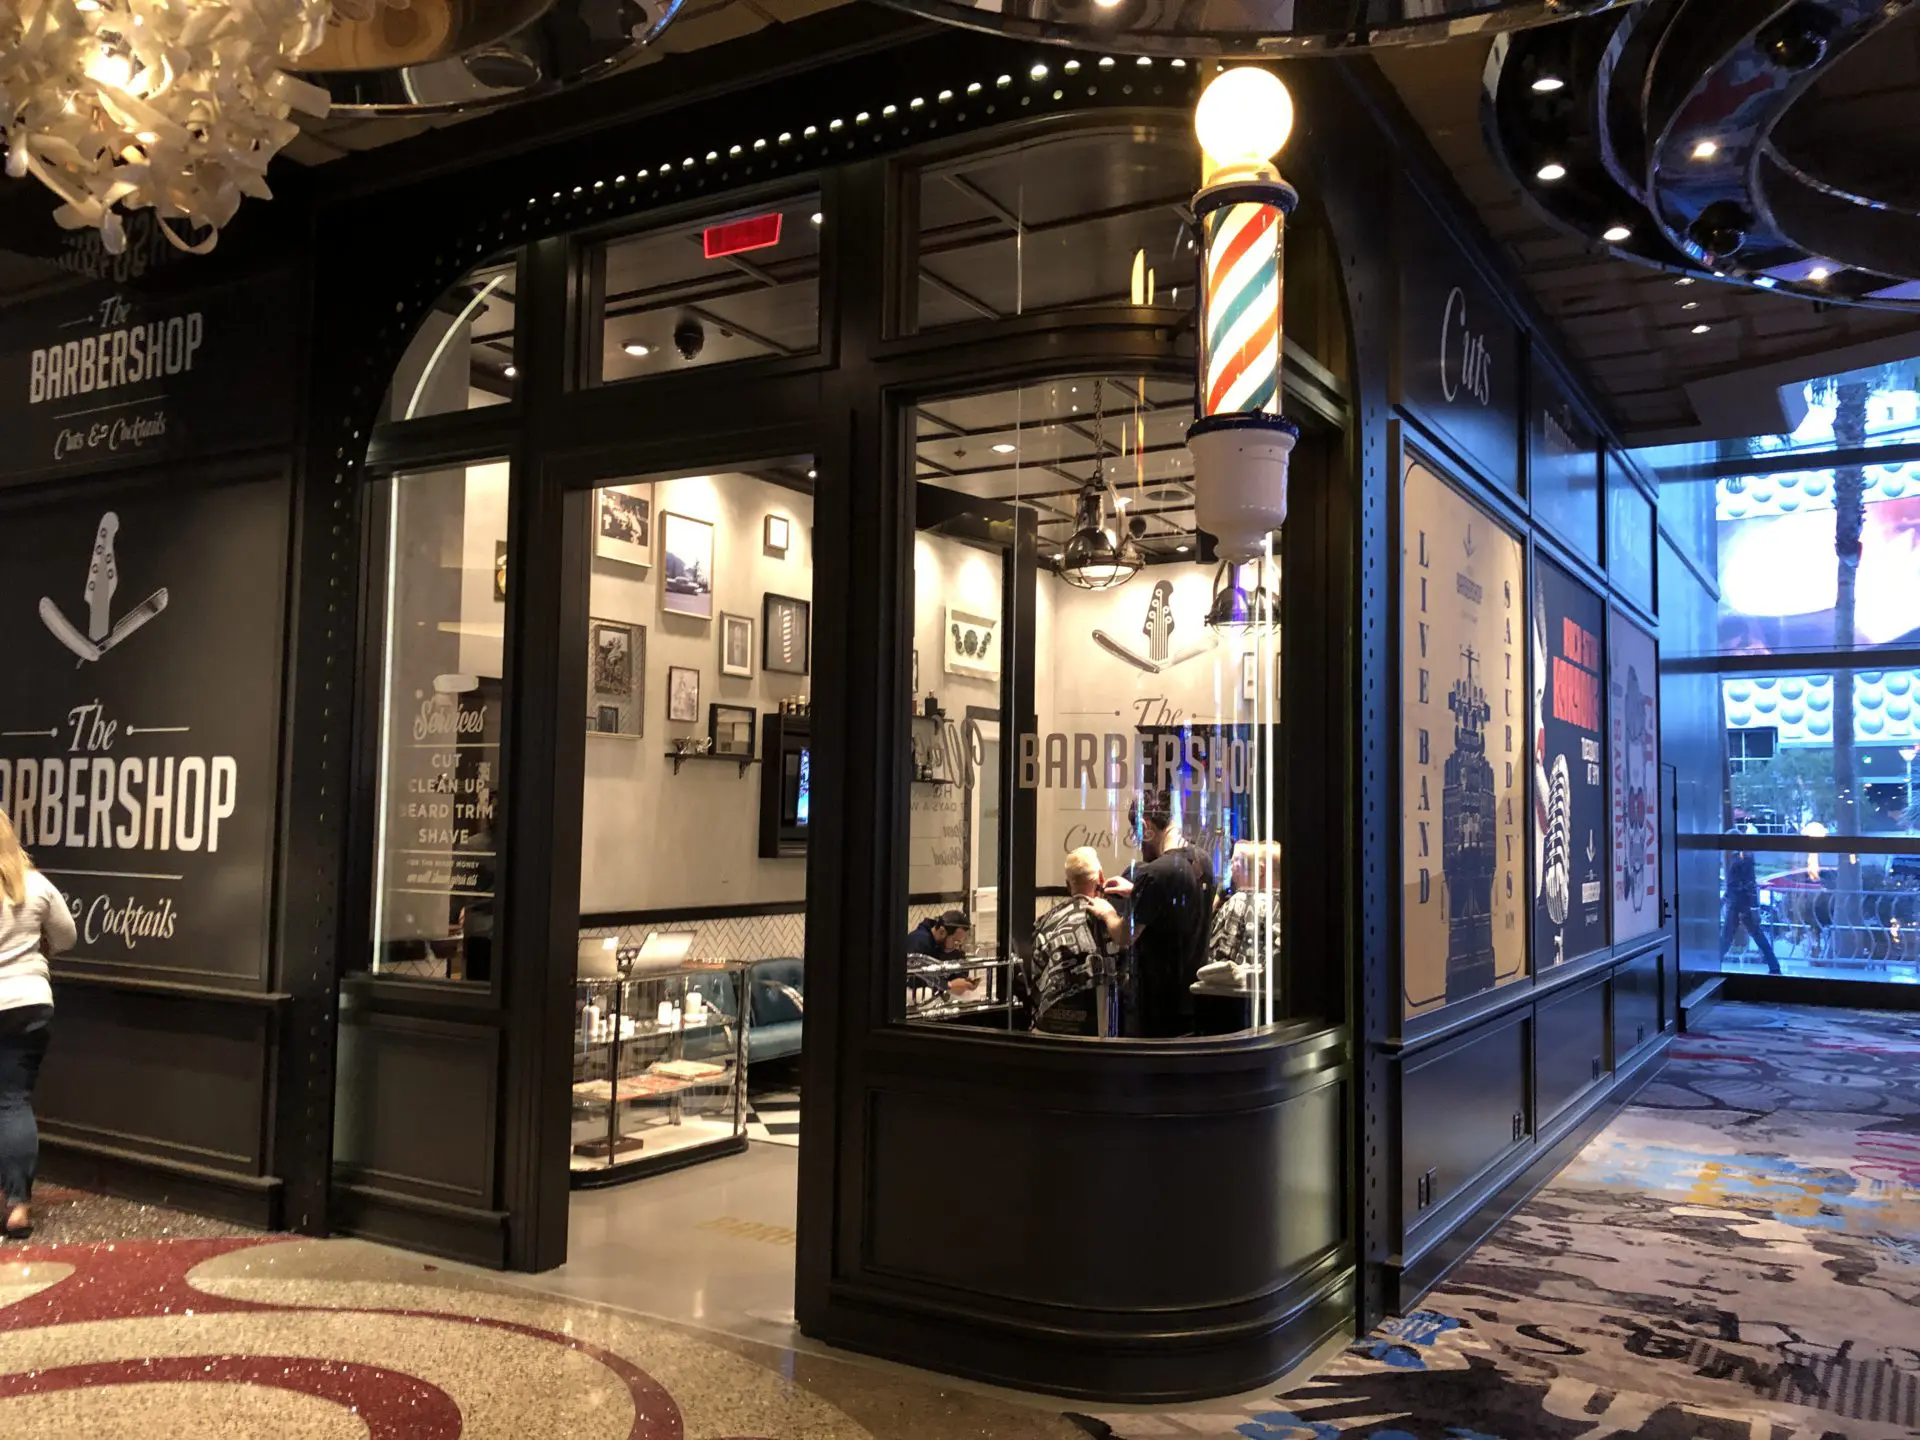 A hidden gem that decorates itself as a Barbershop but is actually a themed swanky back cocktail lounge offering live music & cocktails. It's inside The Cosmopolitan of Las Vegas where cuts and cocktails come together. 